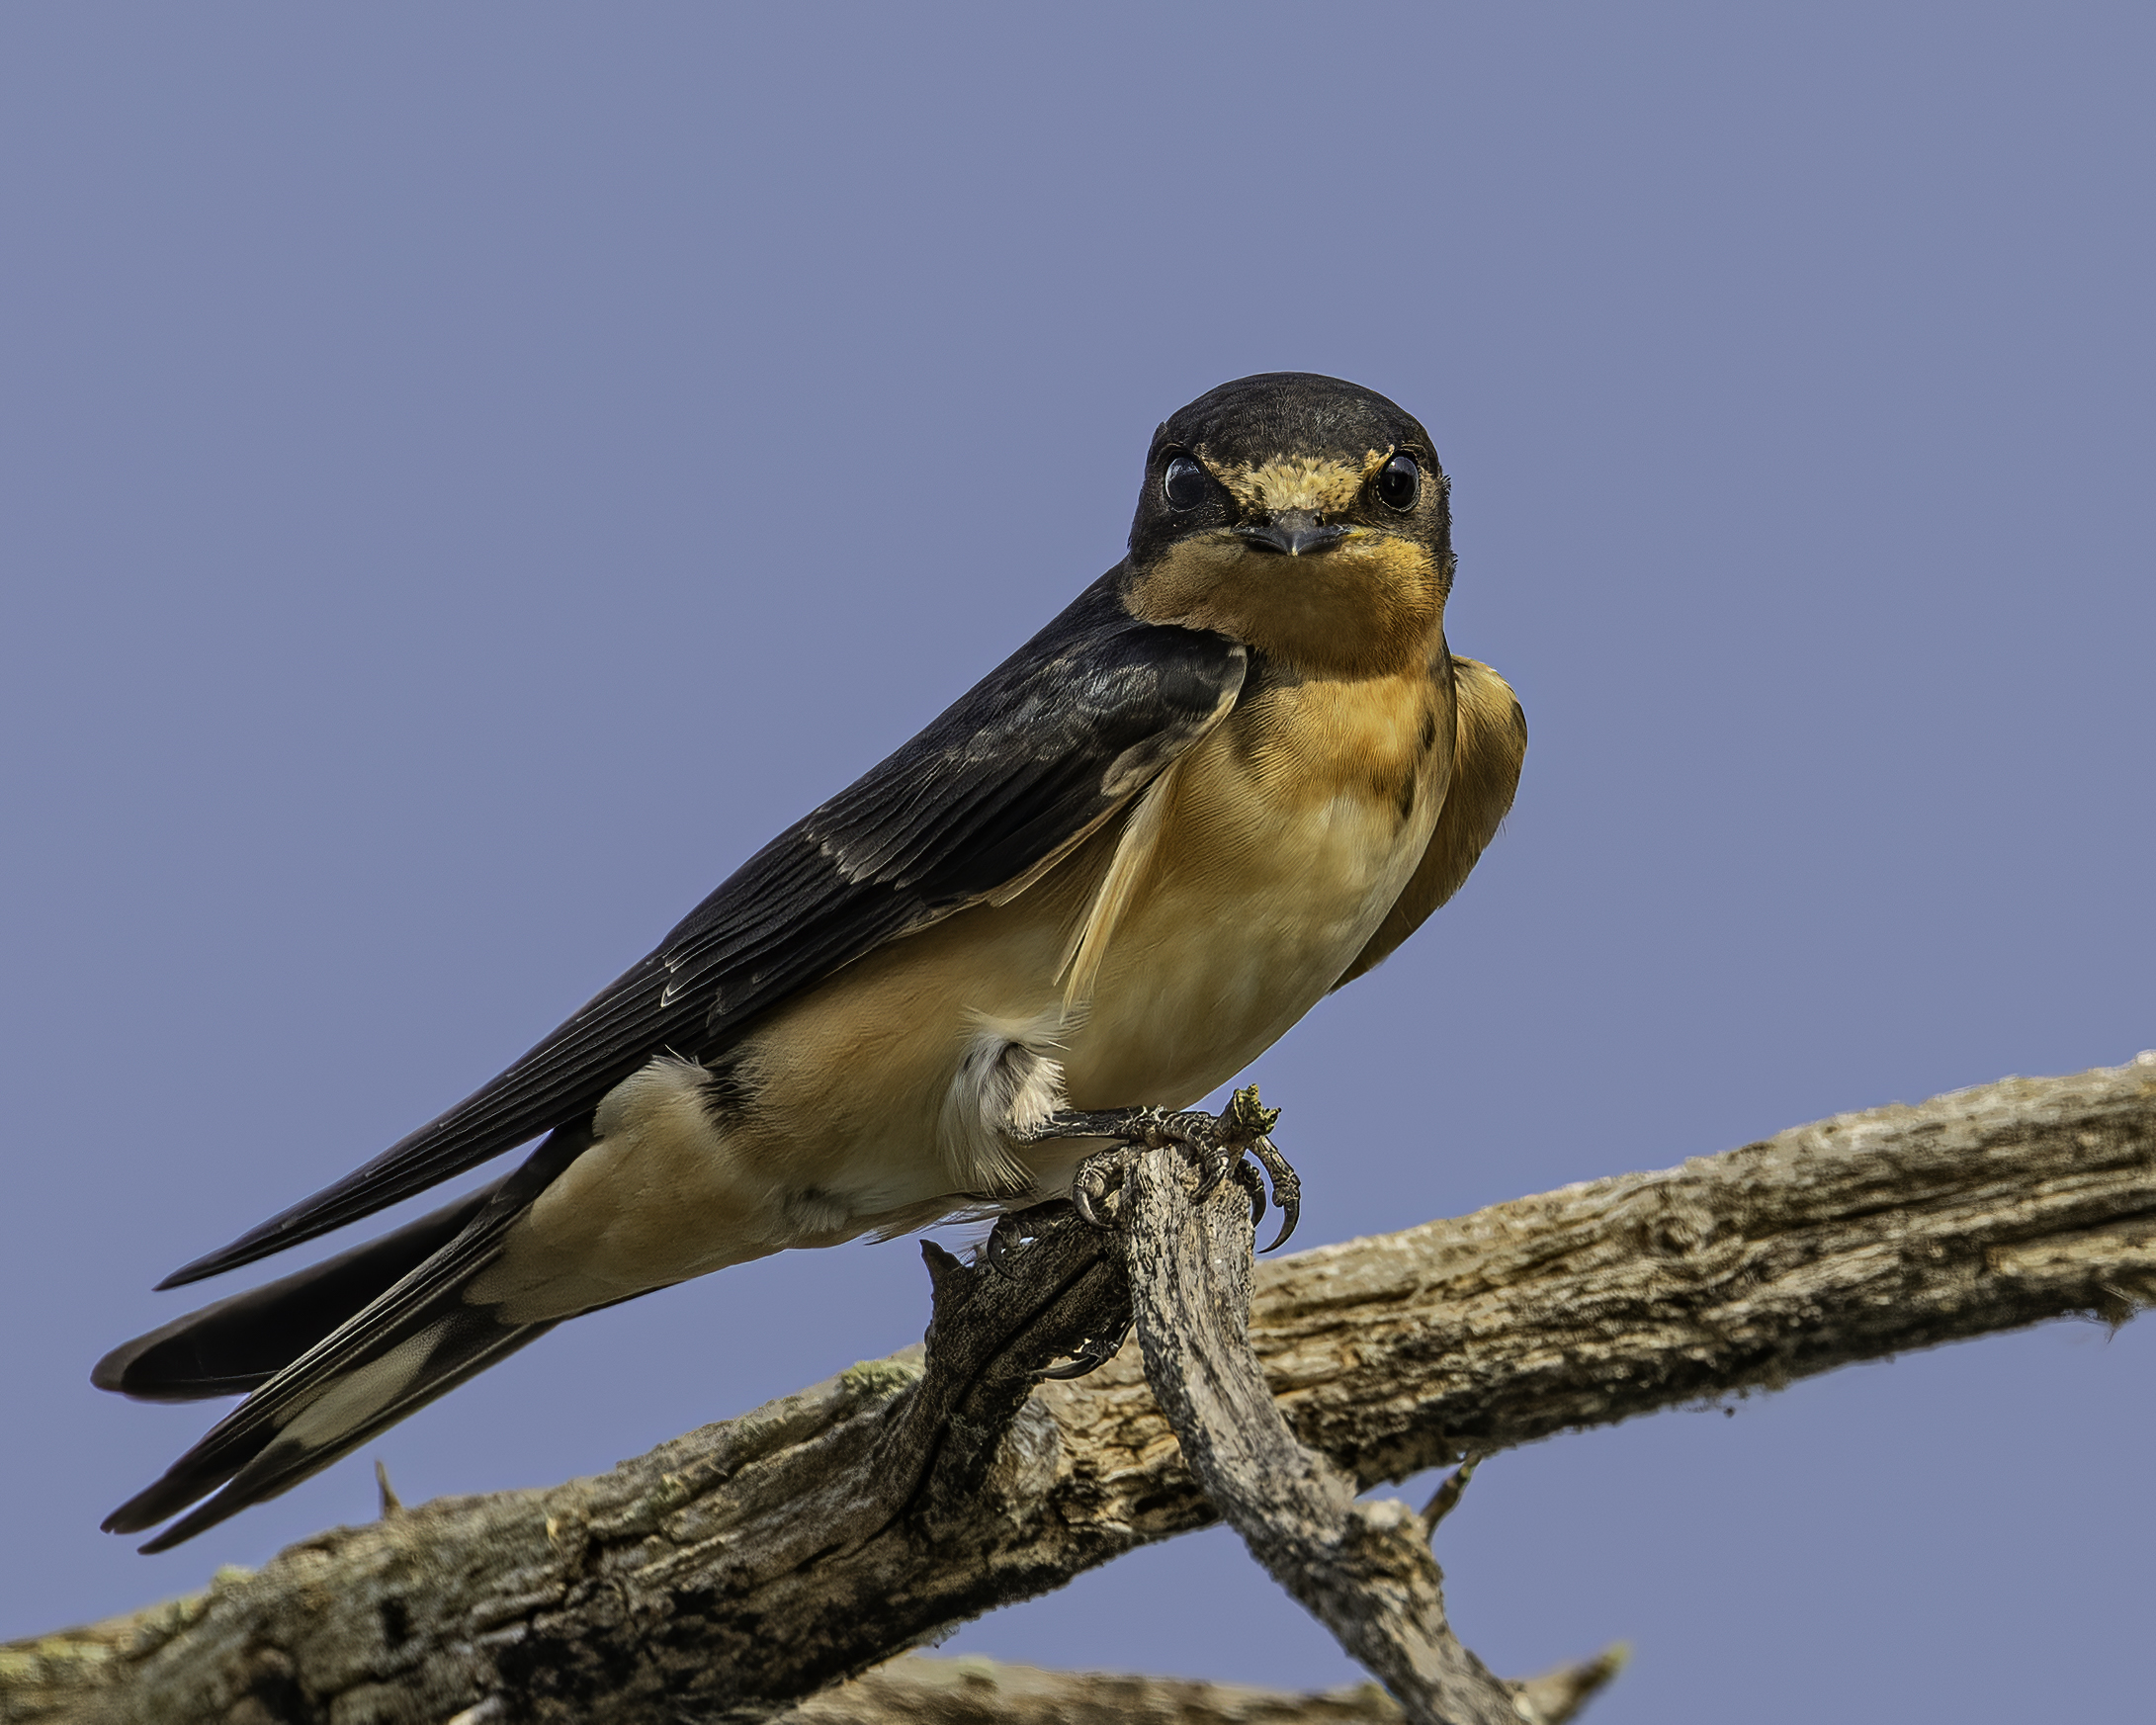 A close up of a barn swallow perched on a branch